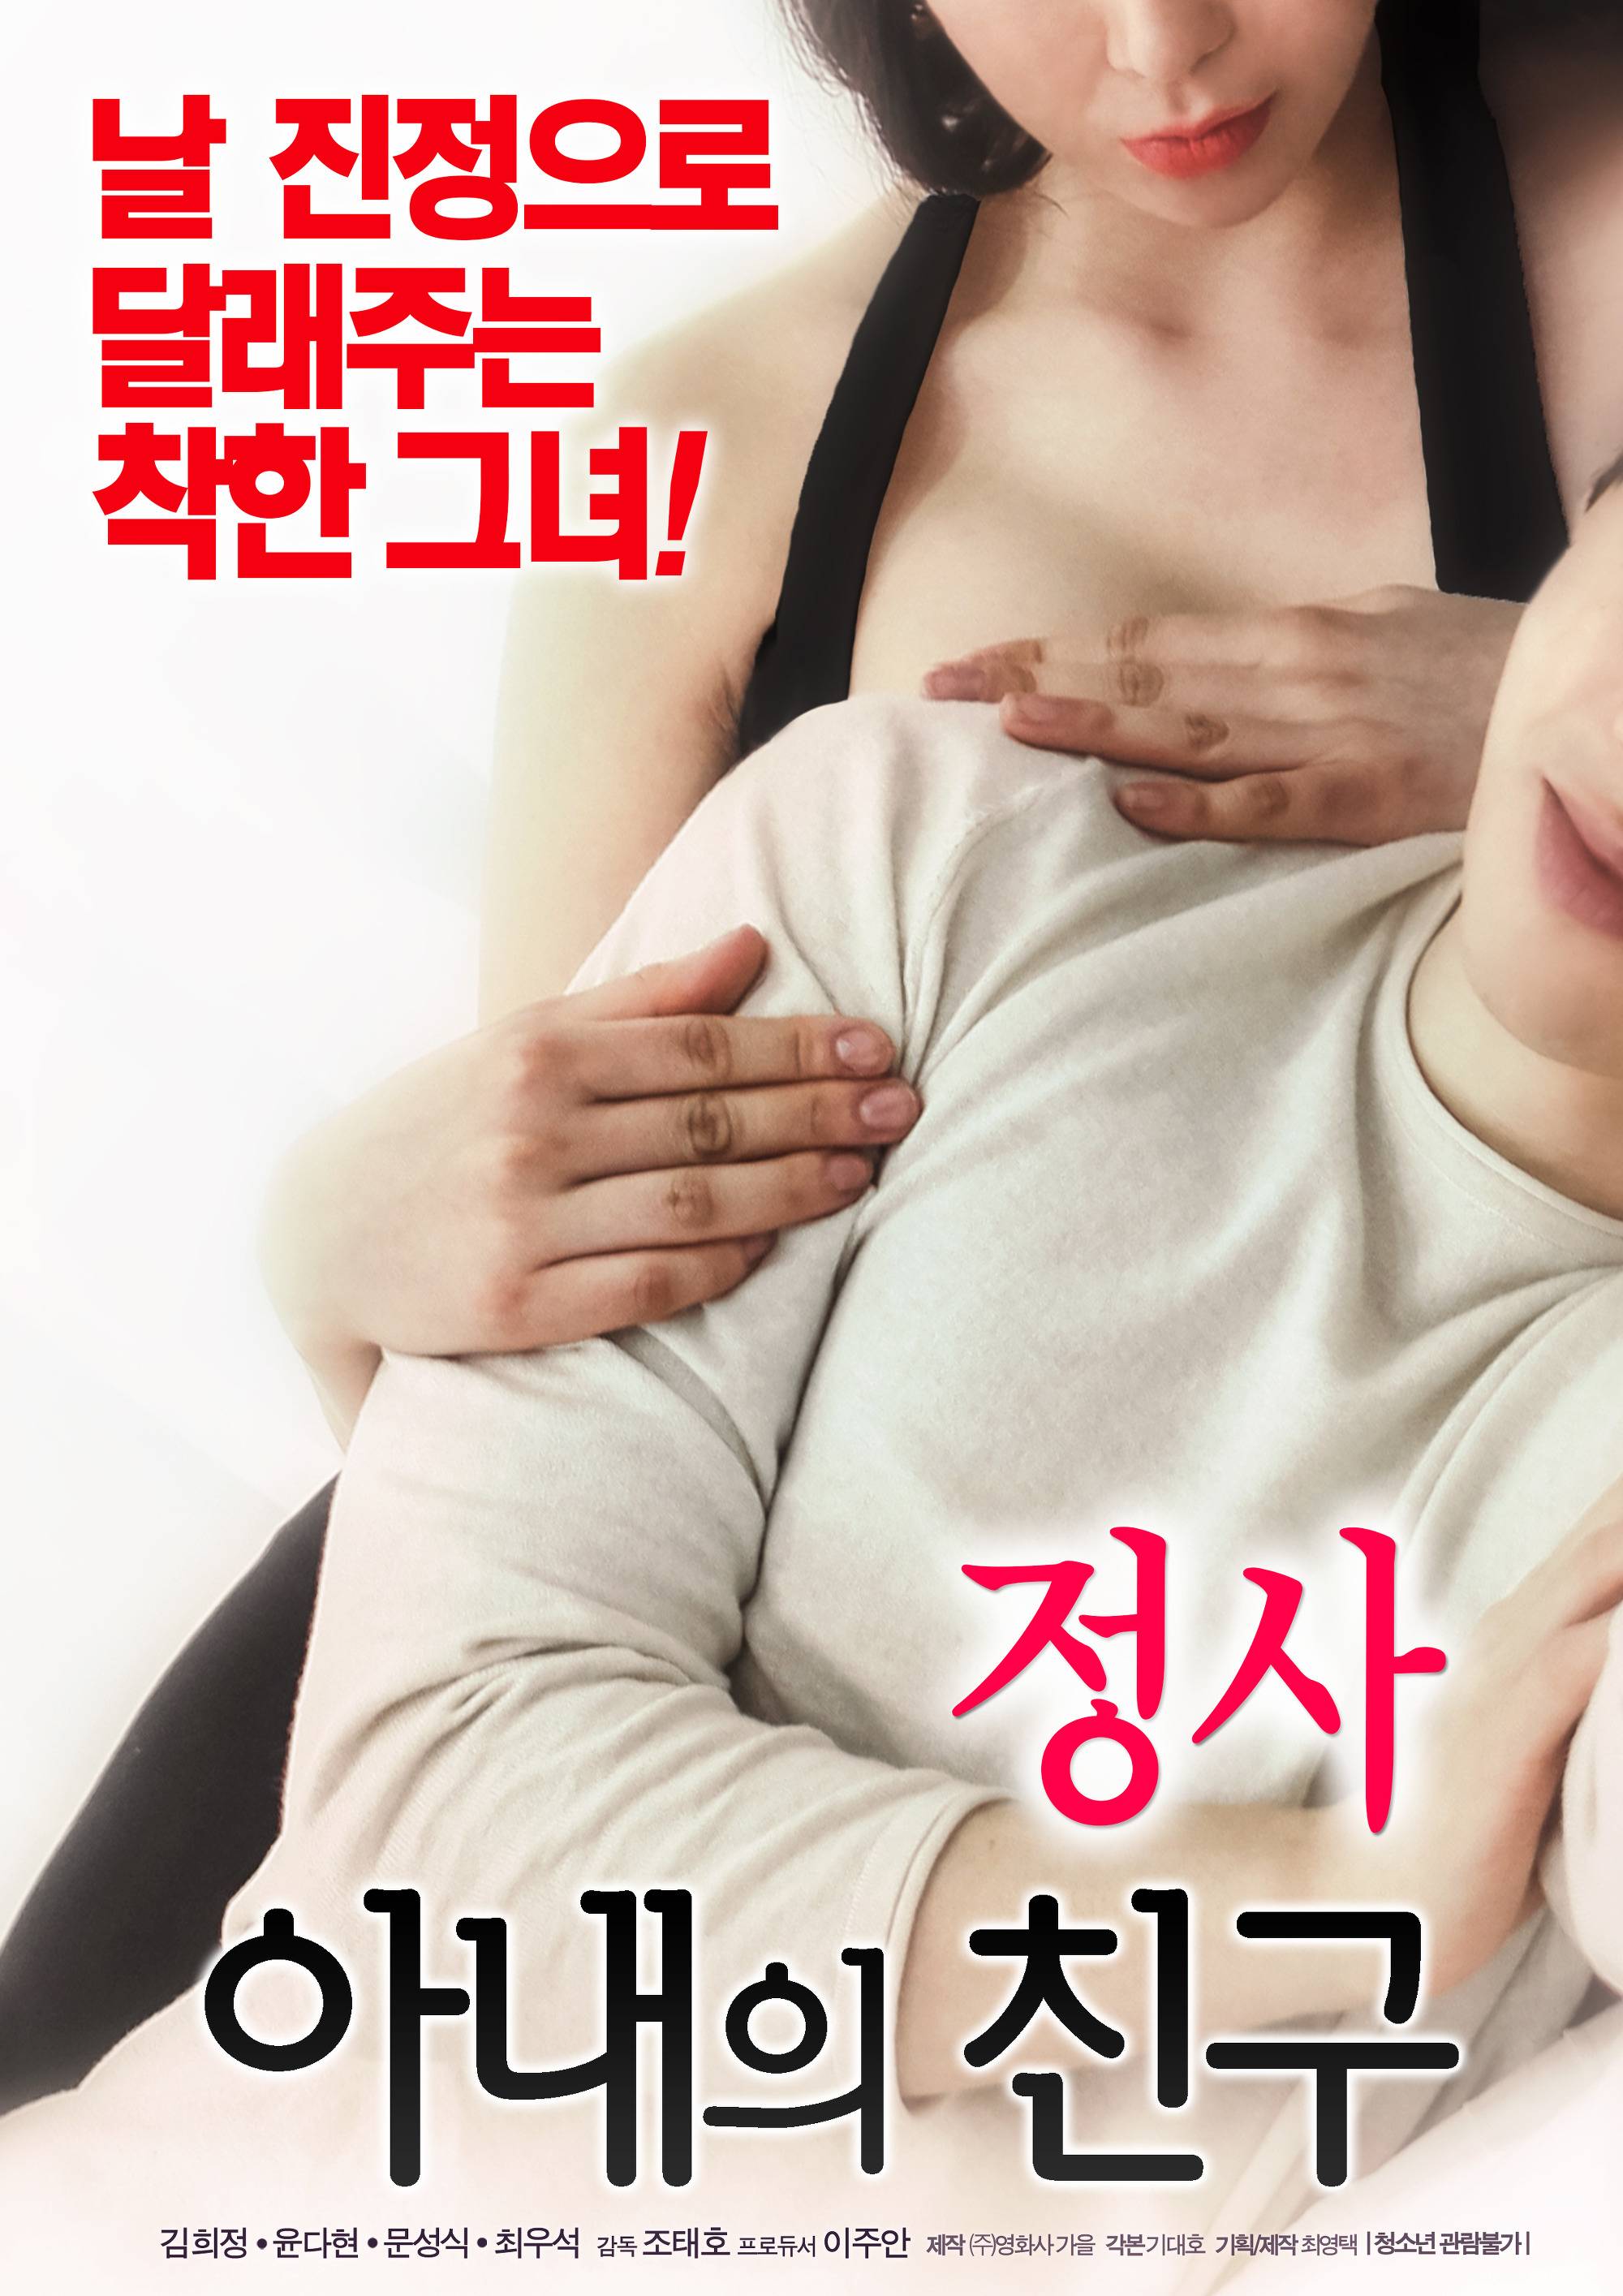 New Movie An Affair My Wifes Friend Tells the Story of Four Lonely People HanCinema